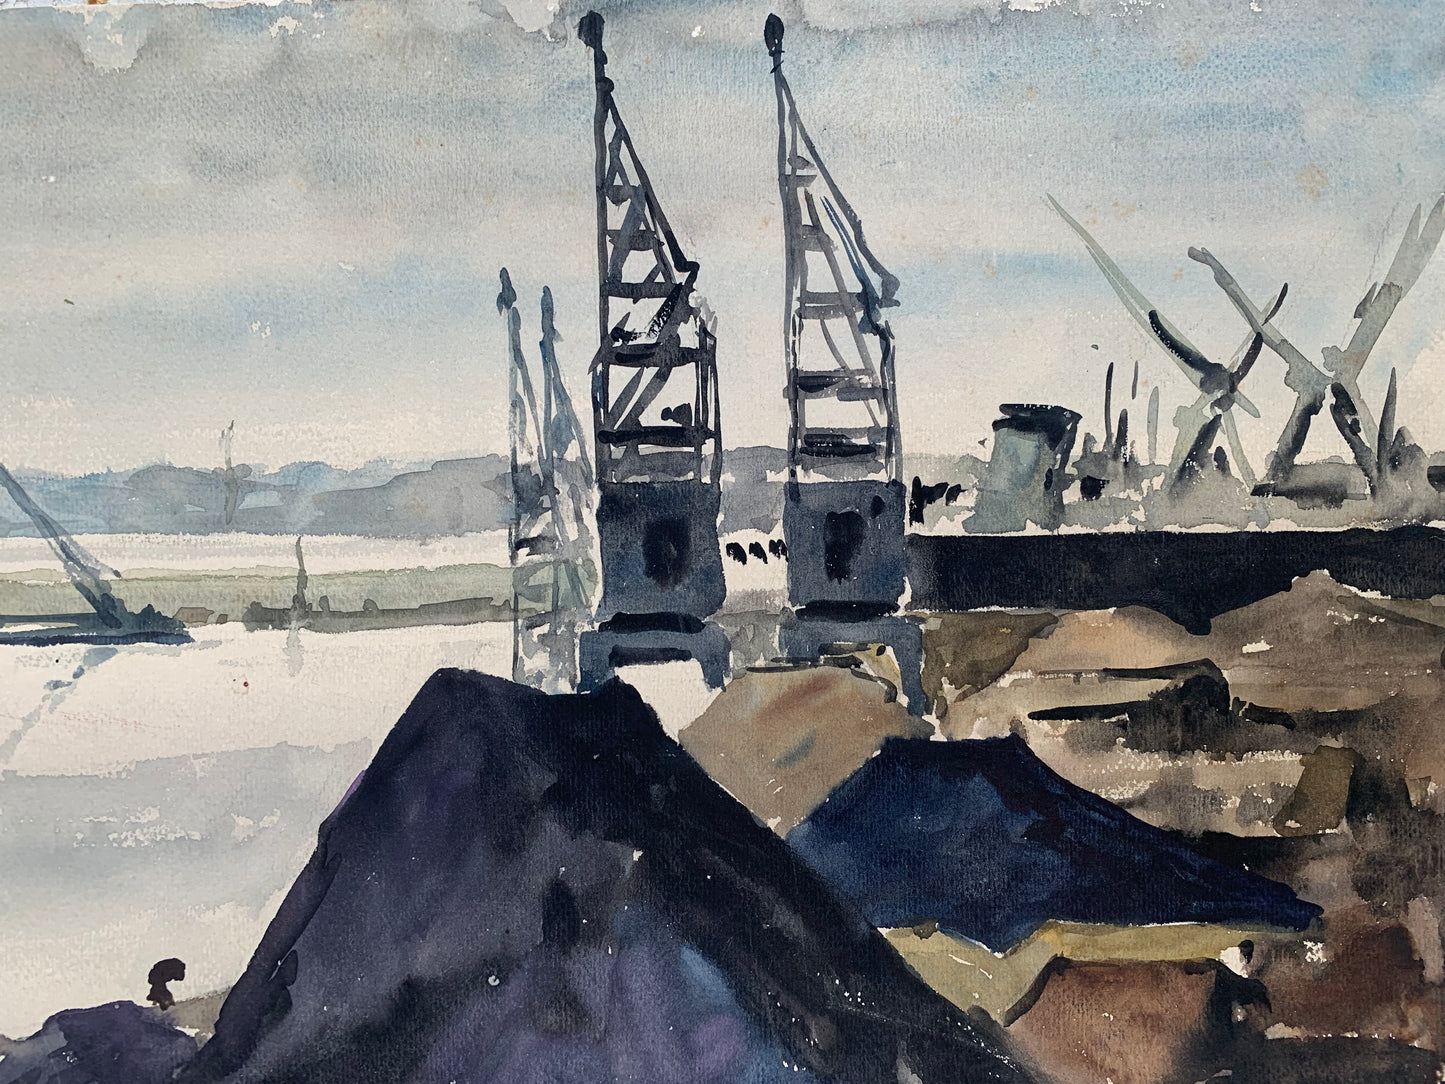 The port of Terragon.  Watercolor about 1940-1950.